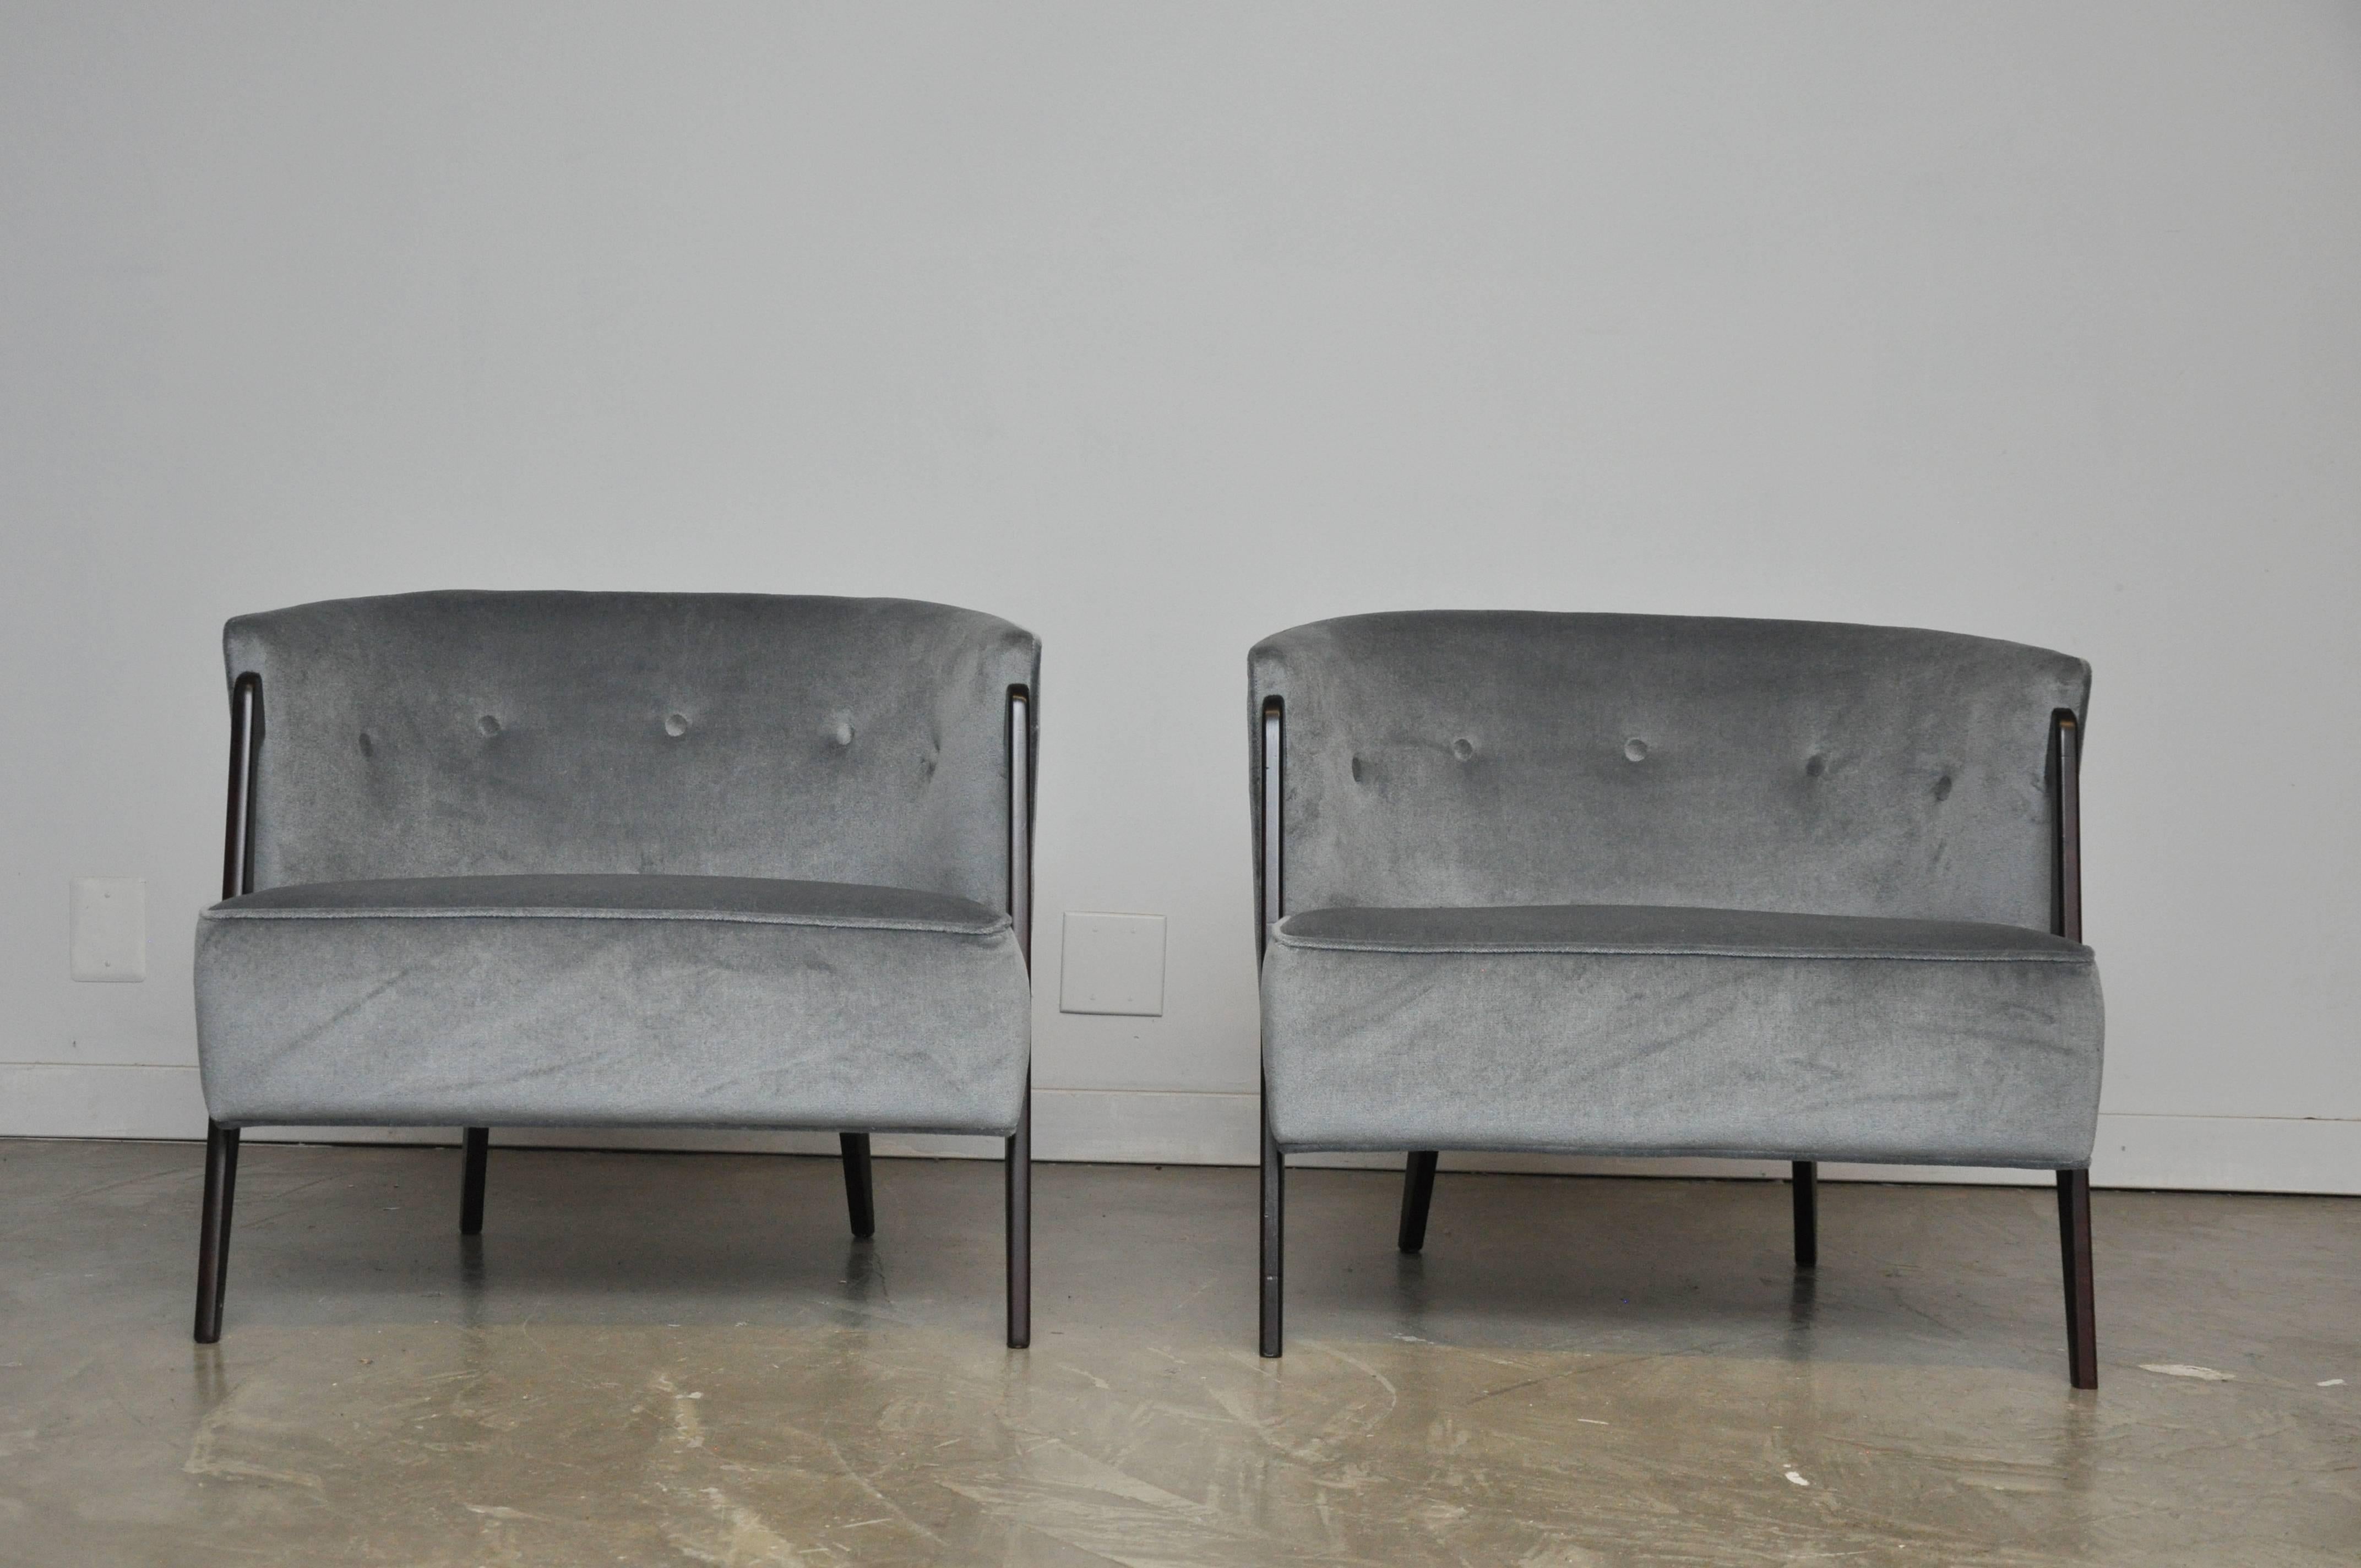 Pair of splayed leg lounge chairs by Karpen of CA. Fully restored exposed frames, done in espresso finish. Reupholstered in grey mohair.